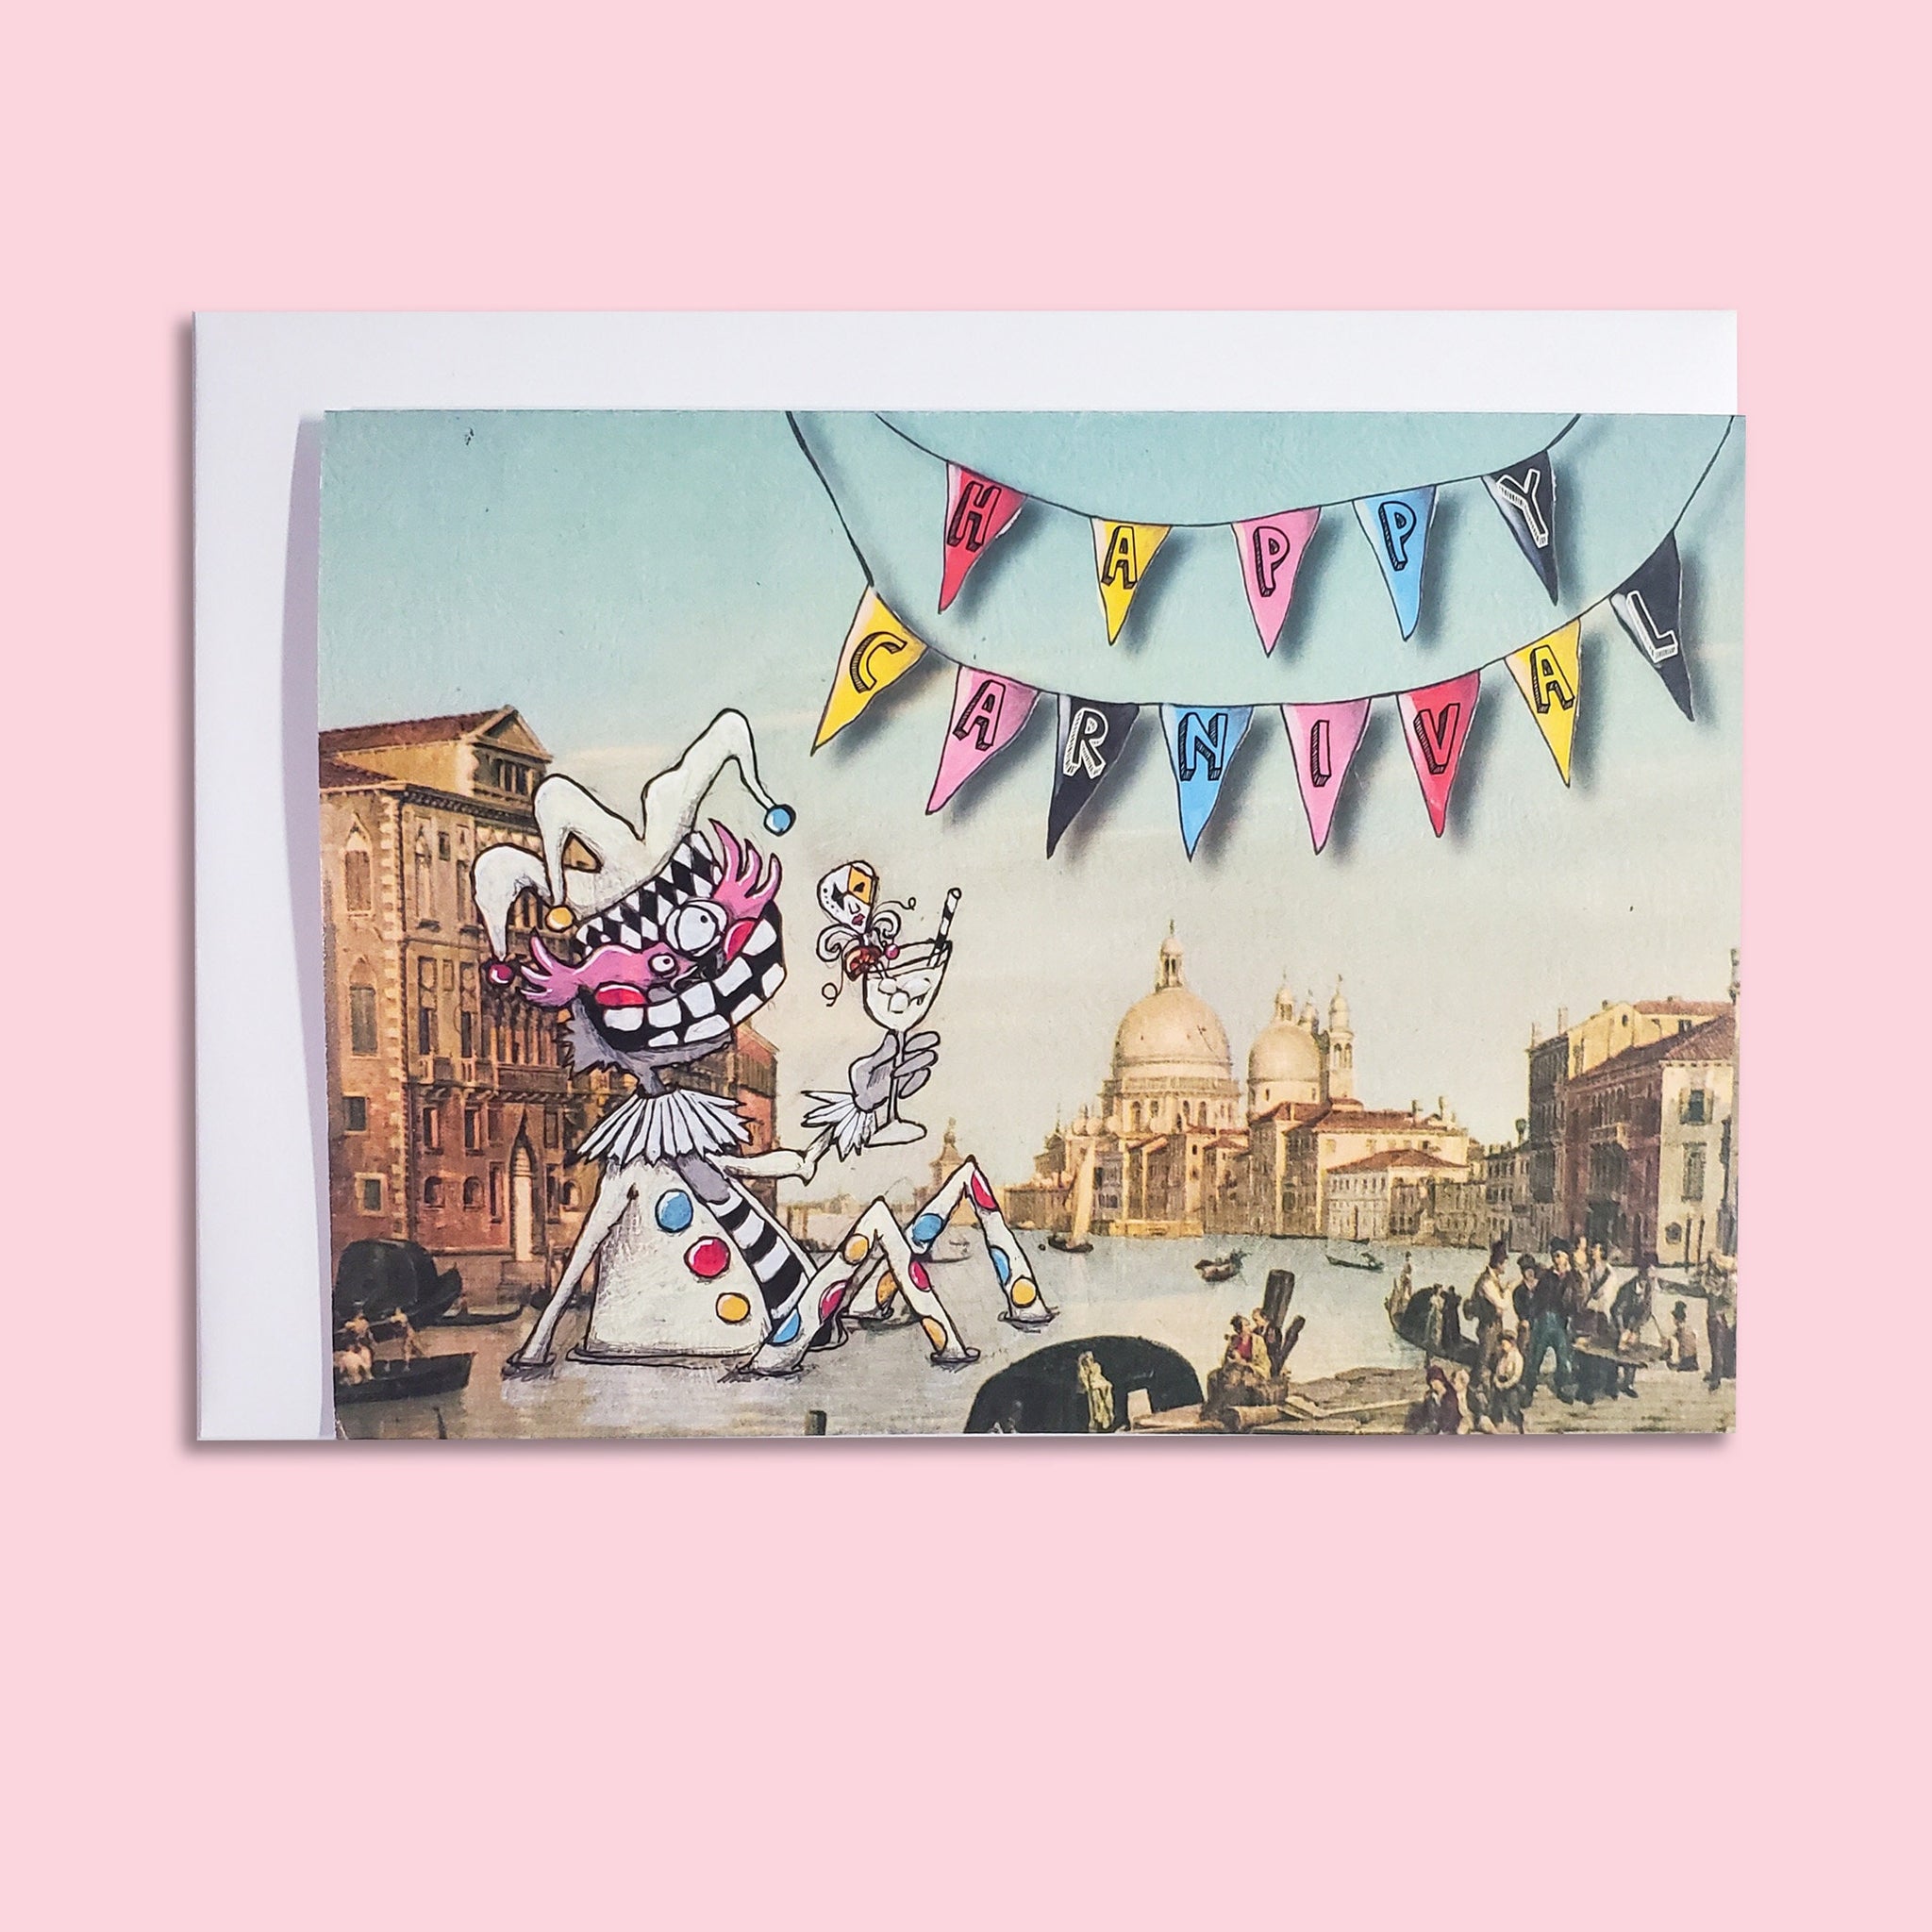 Happy Carnival - Leroy's Place Greeting Card